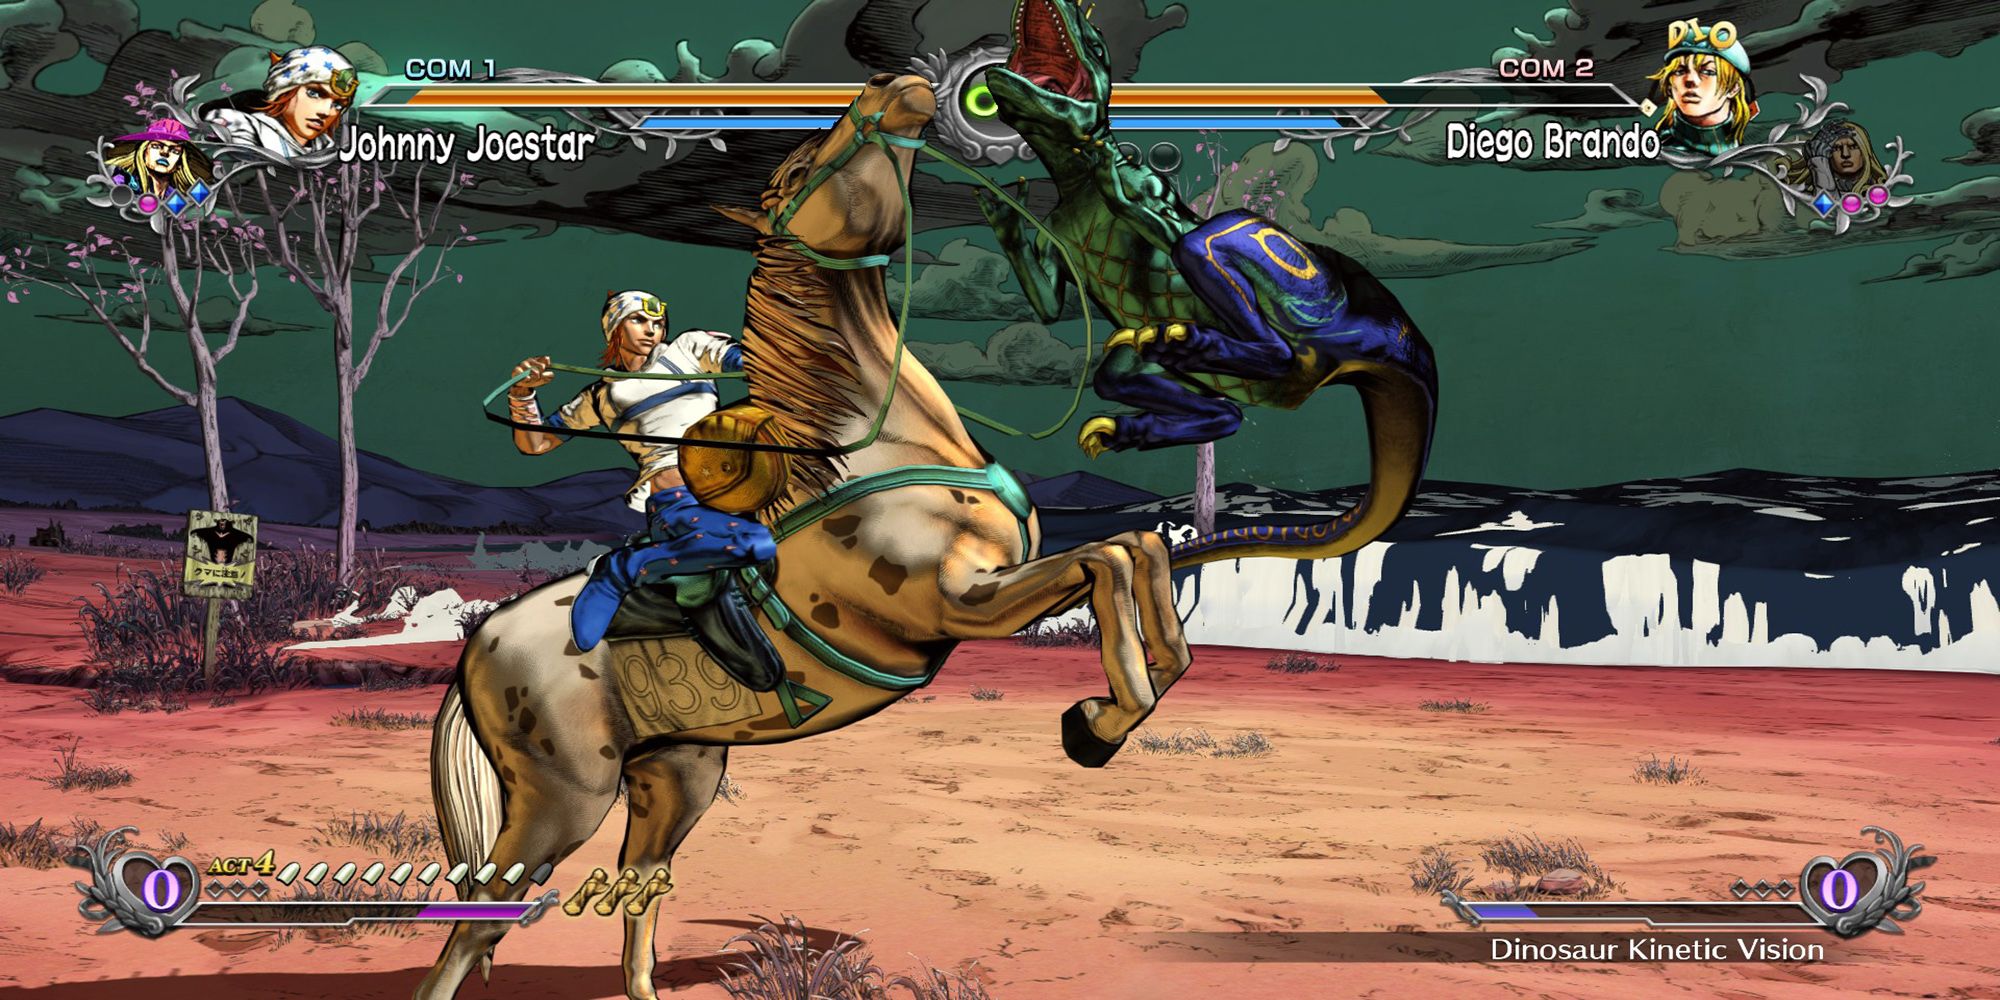 Johnny reigns his horse up on its hind-legs to punish one of Diego's Dinosaur attacks during a battle on the Philadelphia Seaside in JoJo's Bizarre Adventure ASBR.